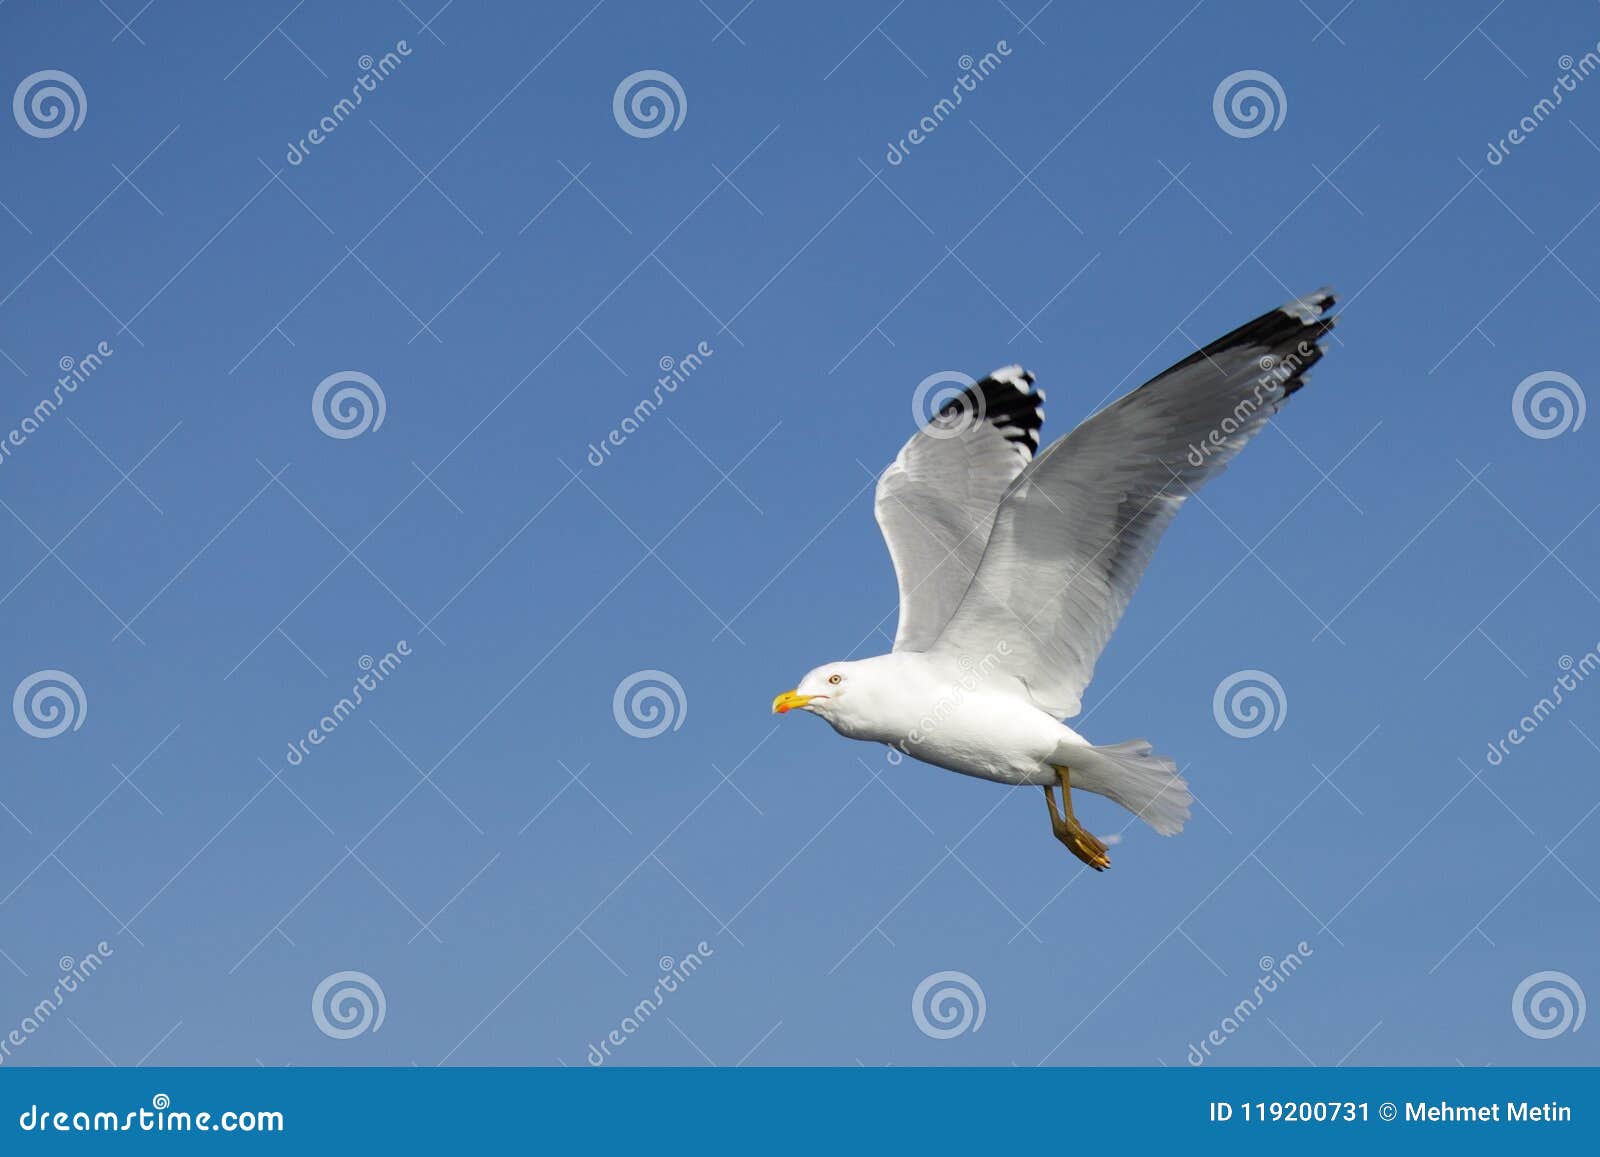 the free flying seagull